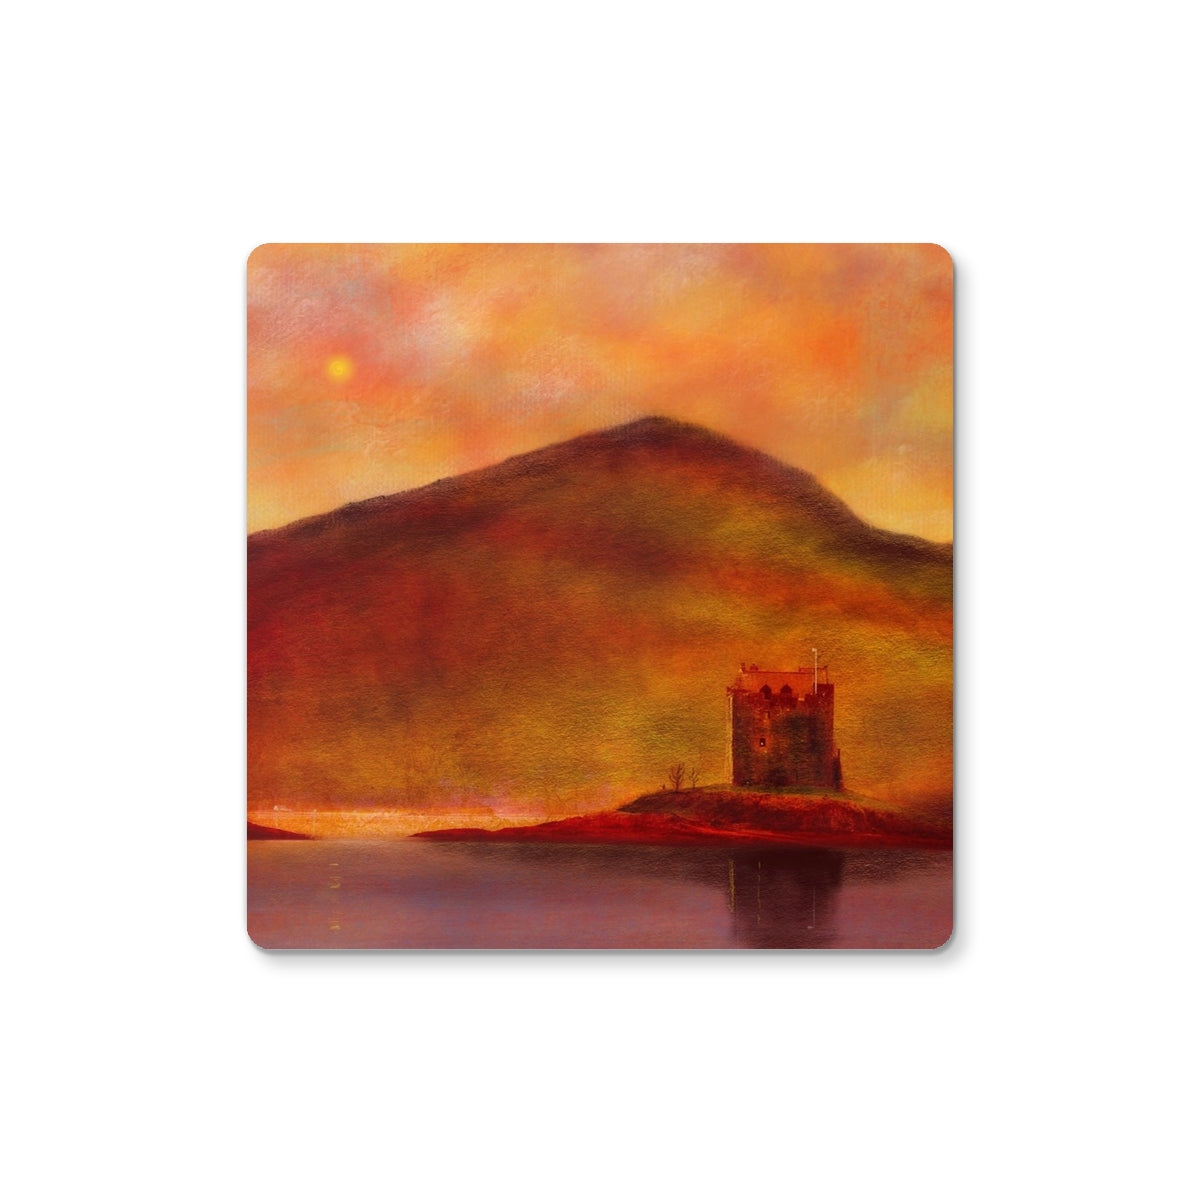 Castle Stalker Sunset Art Gifts Coaster-Coasters-Historic & Iconic Scotland Art Gallery-2 Coasters-Paintings, Prints, Homeware, Art Gifts From Scotland By Scottish Artist Kevin Hunter